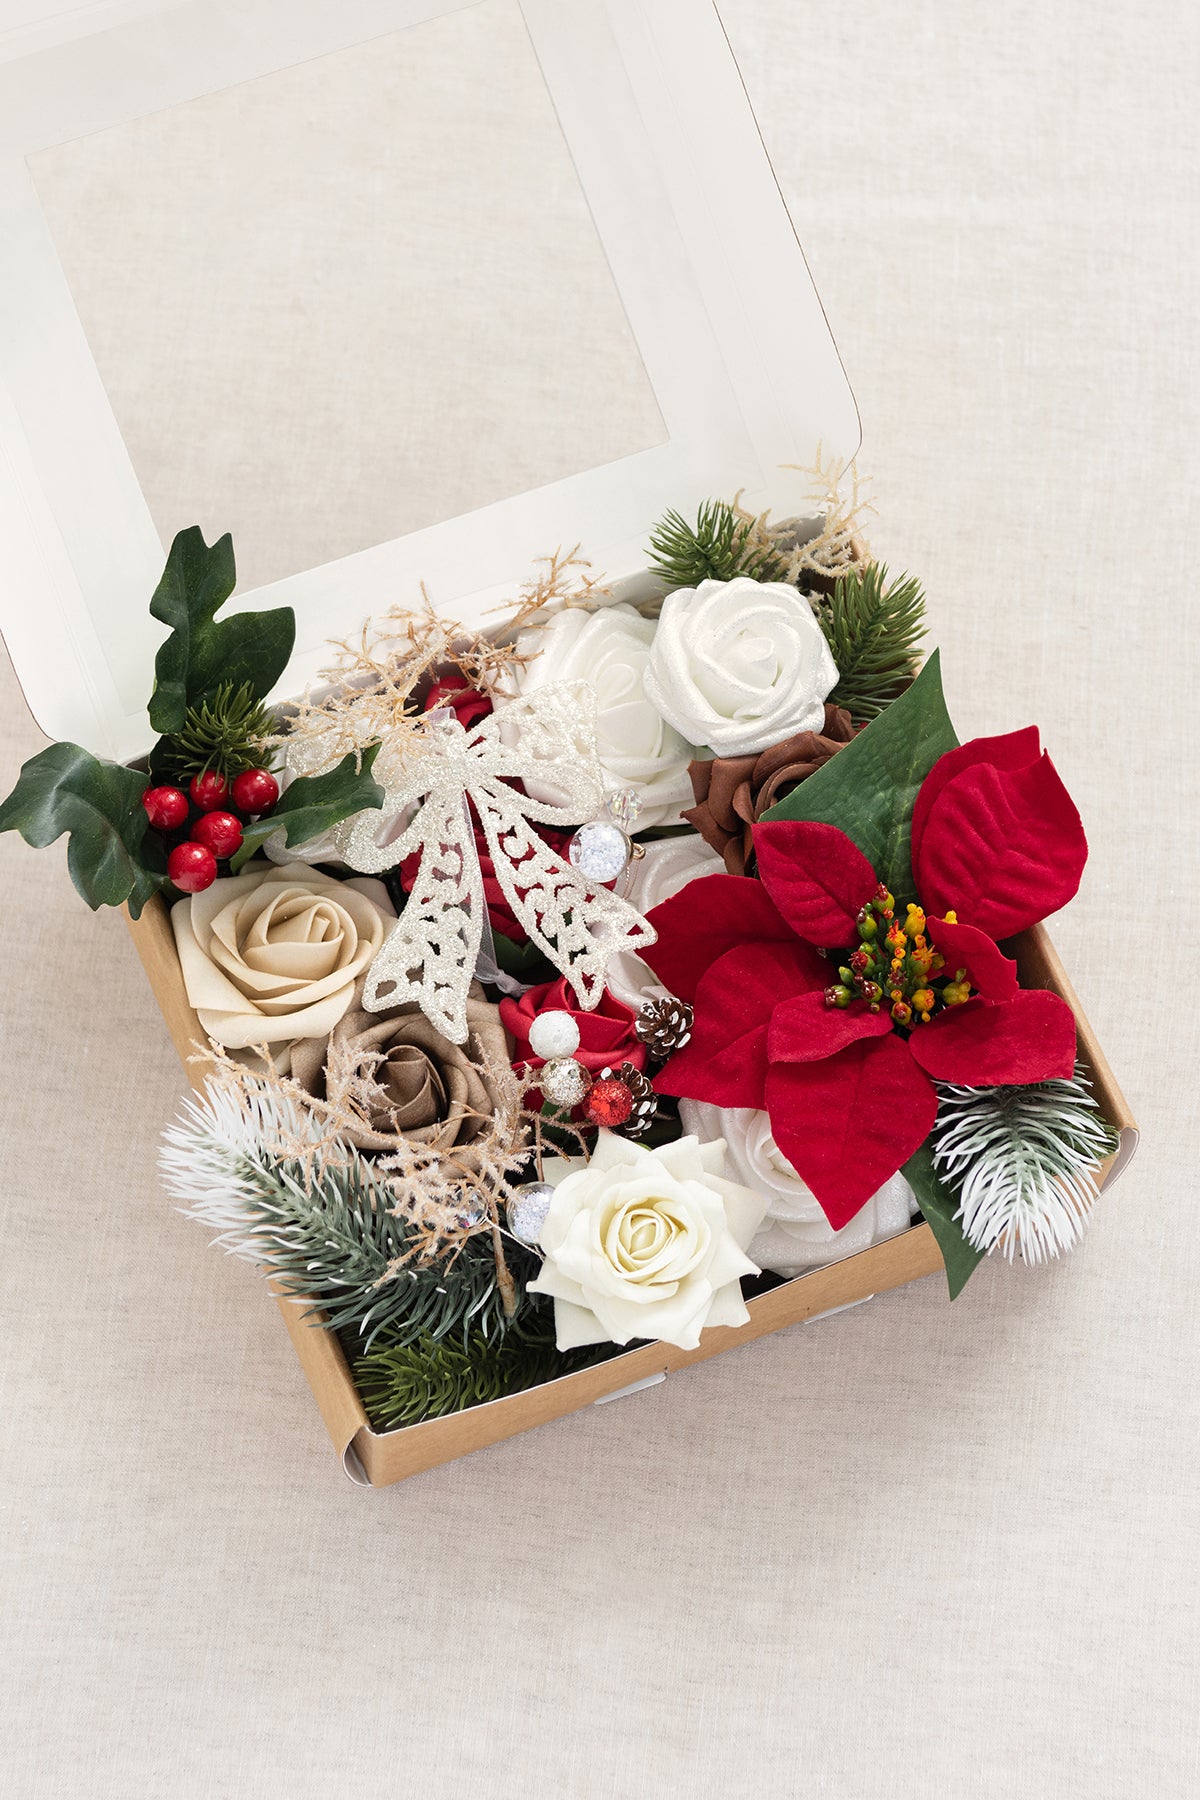 DIY Designer Flower Boxes in Champagne Christmas – Ling's Moment